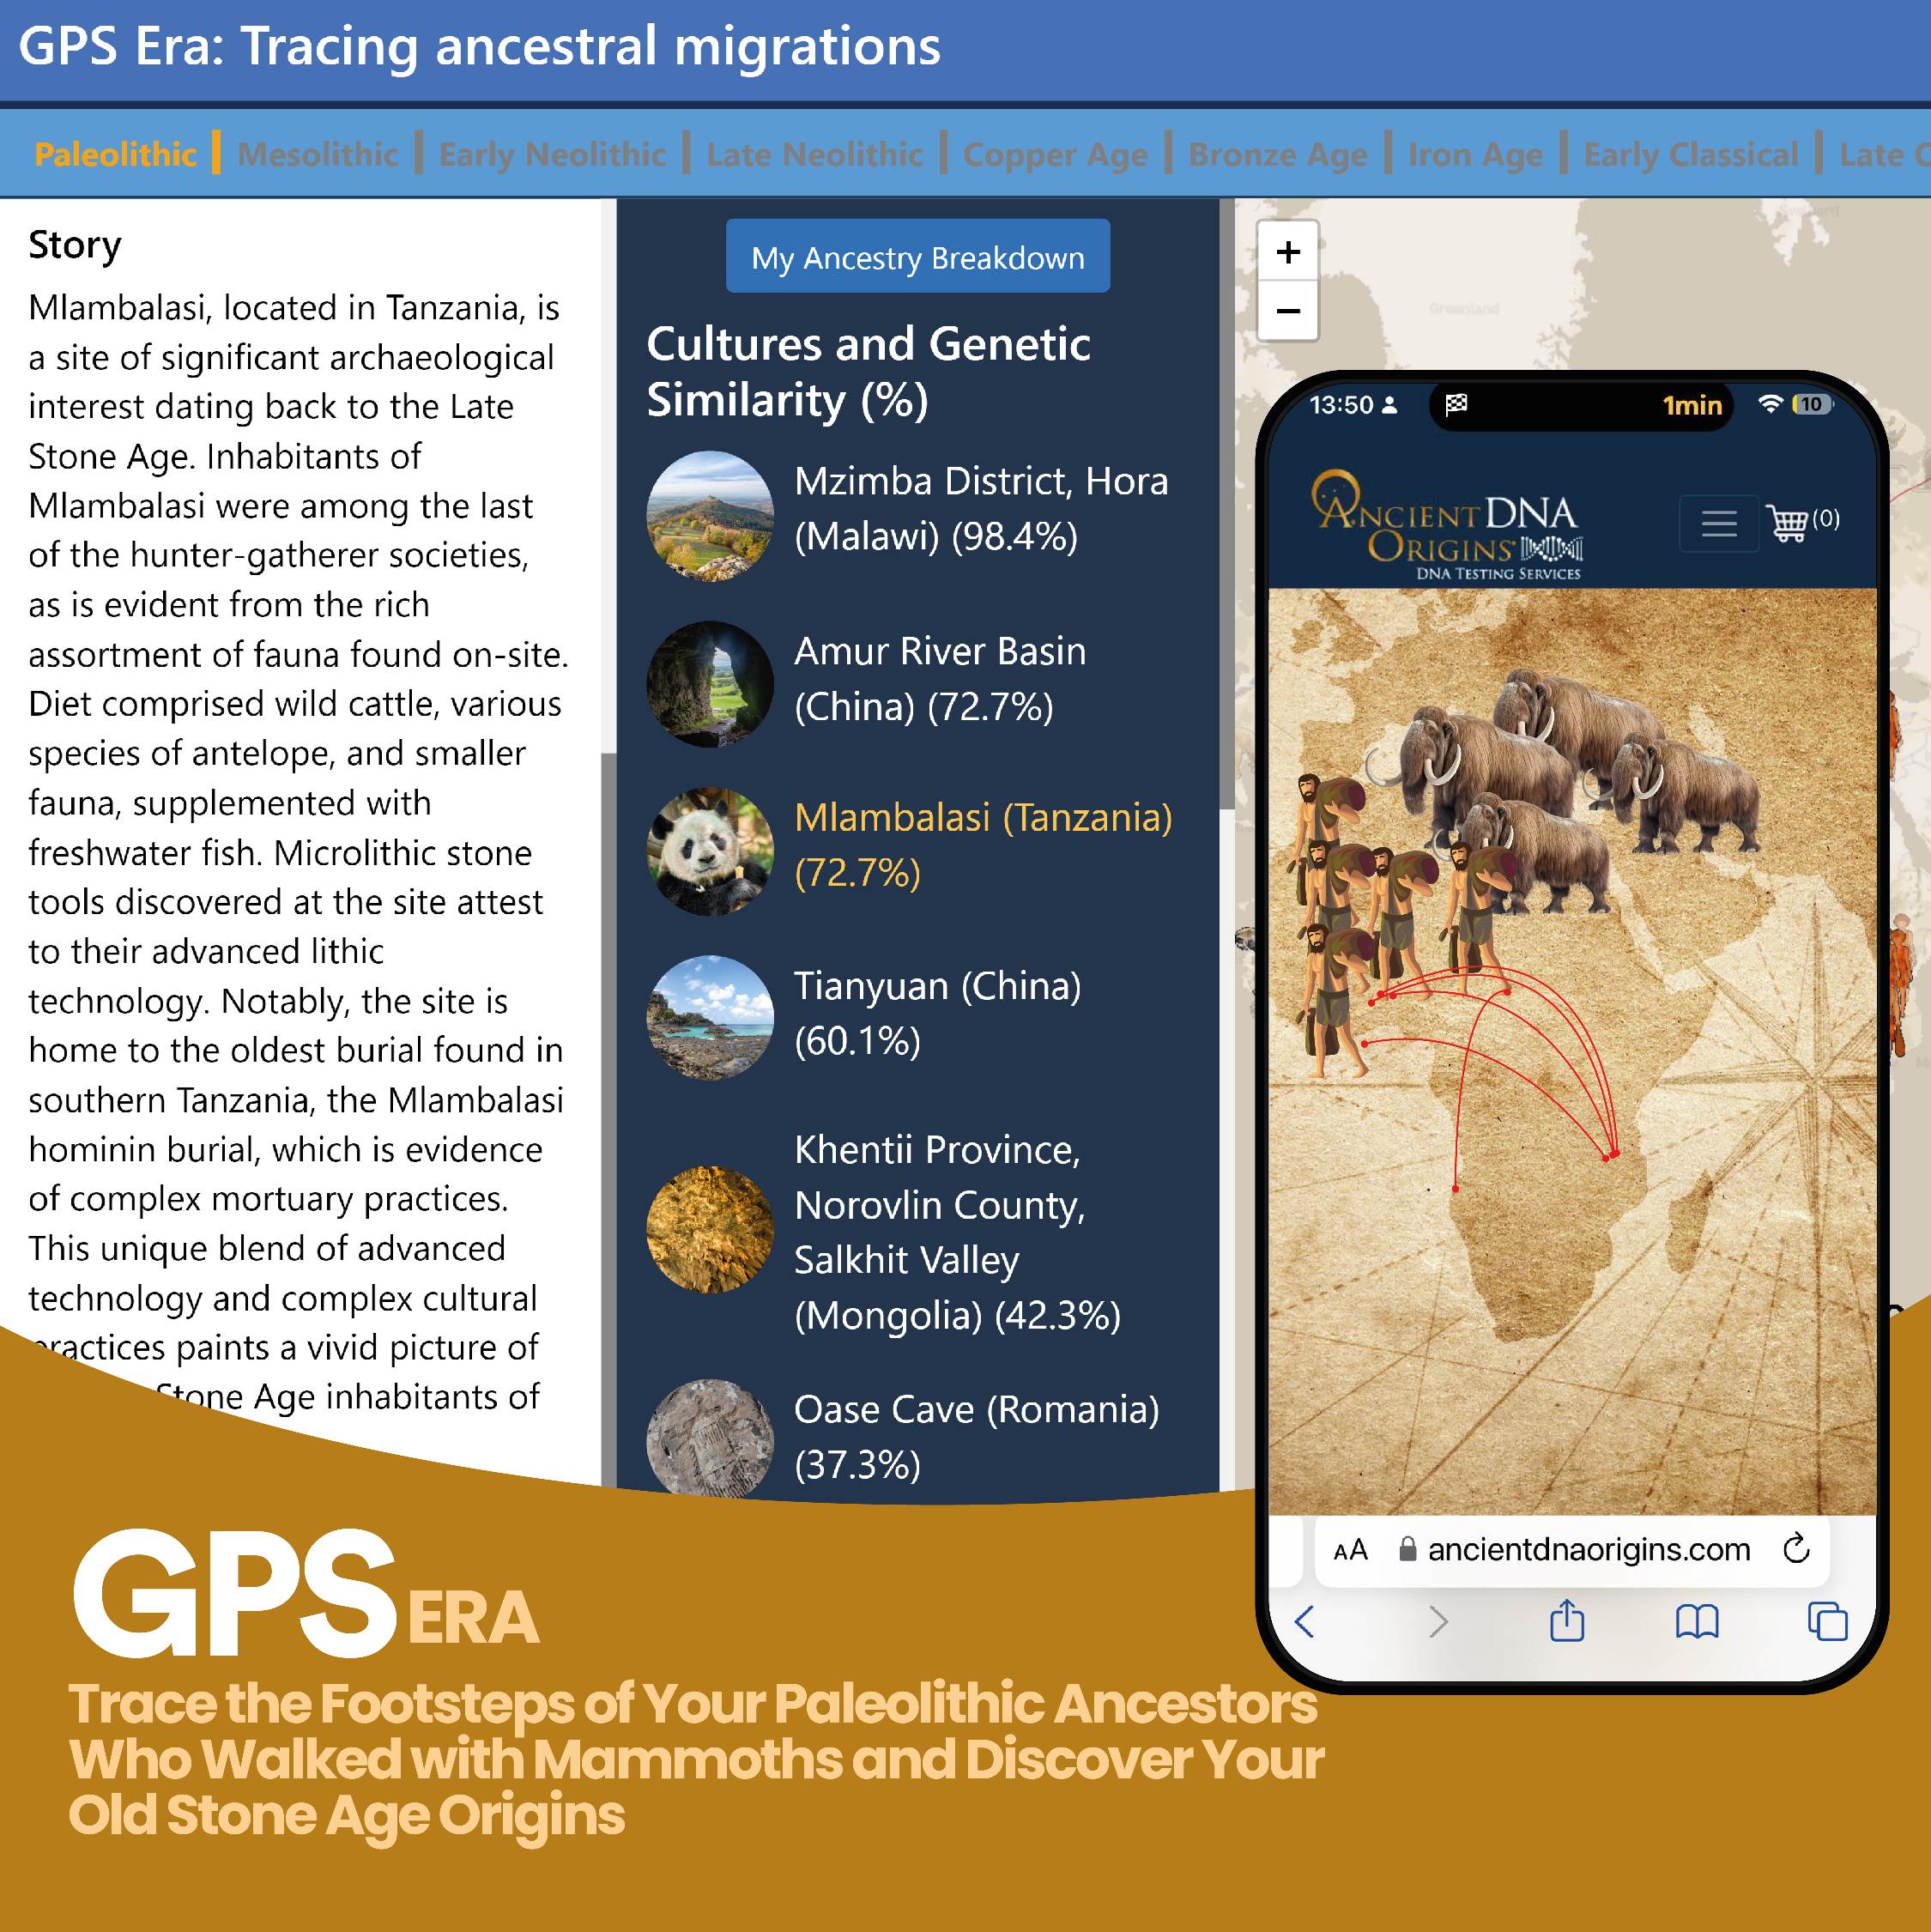 Learn the stories of your ancestral cultures and view their Paleolithic migrations